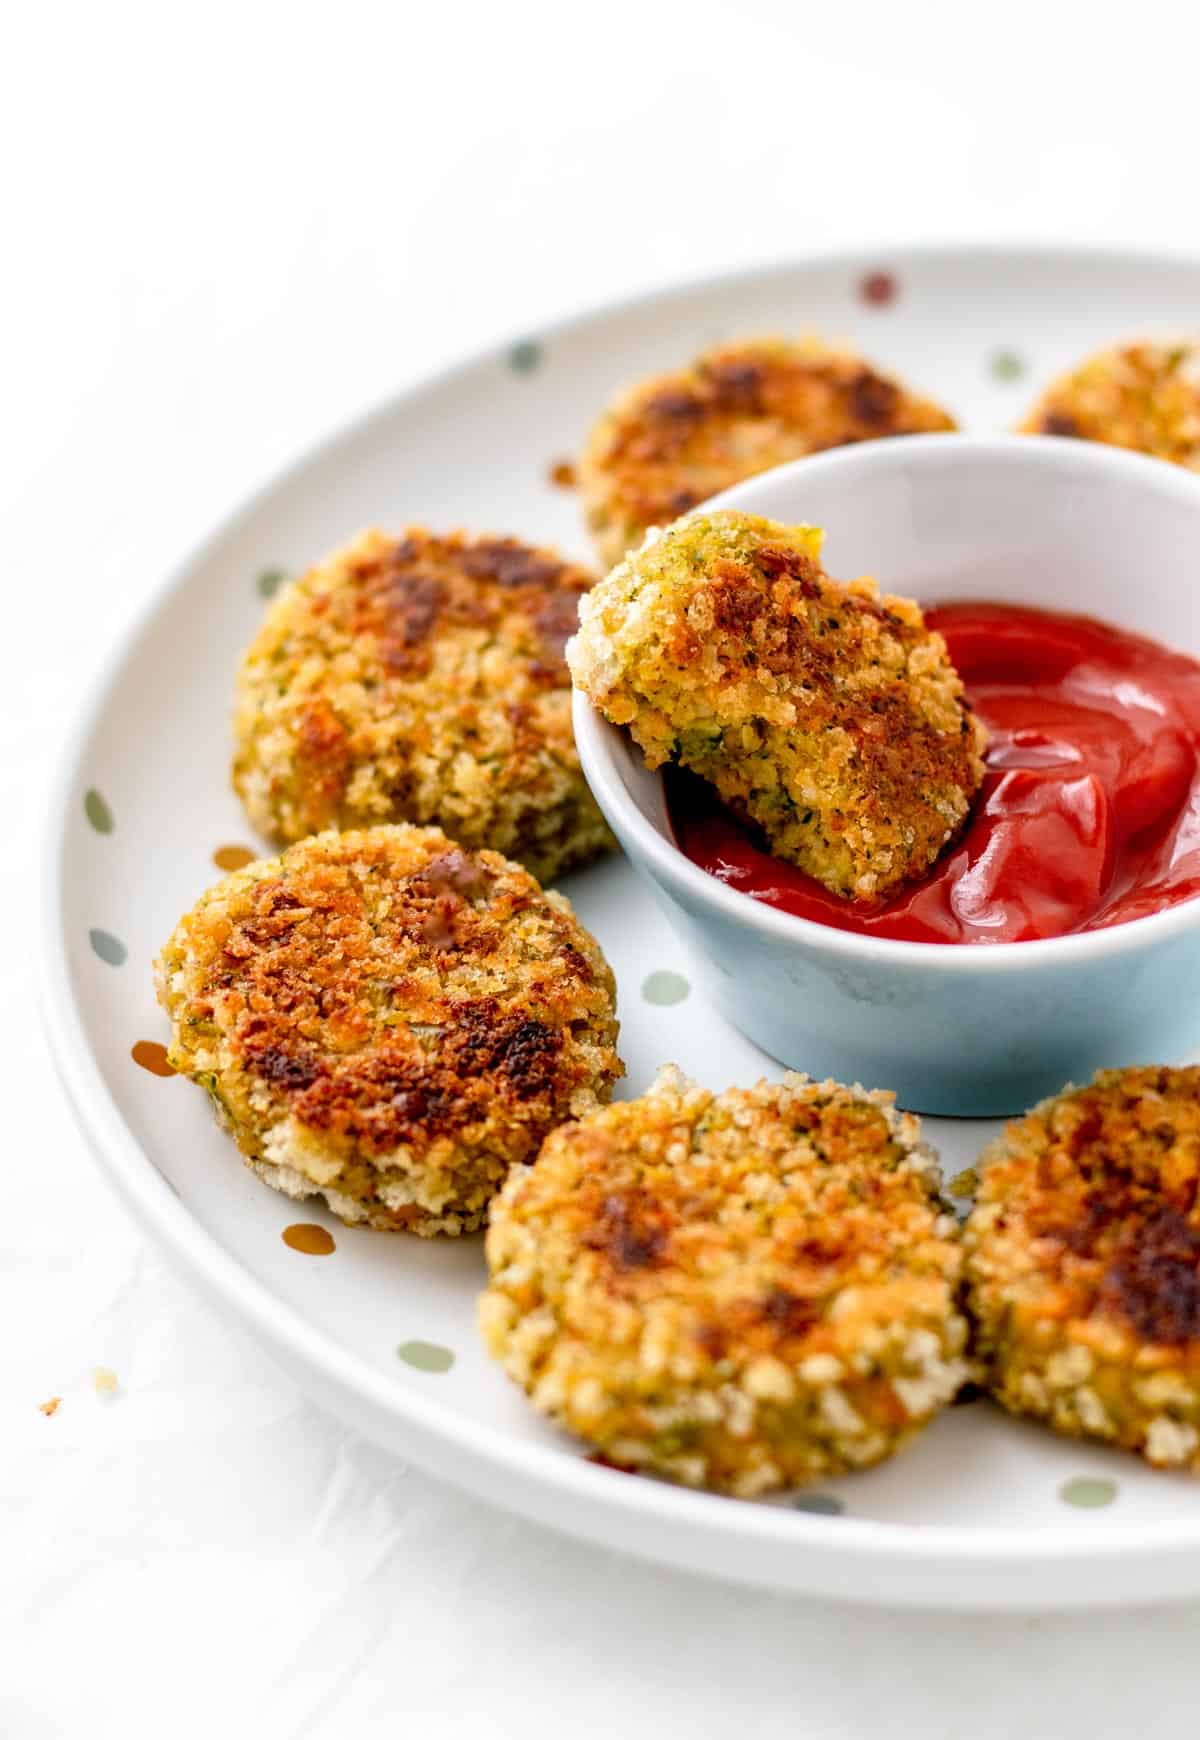 Hidden veggie nuggets on a polka dot plate with one of them being dipped into a bowl of ketchup.